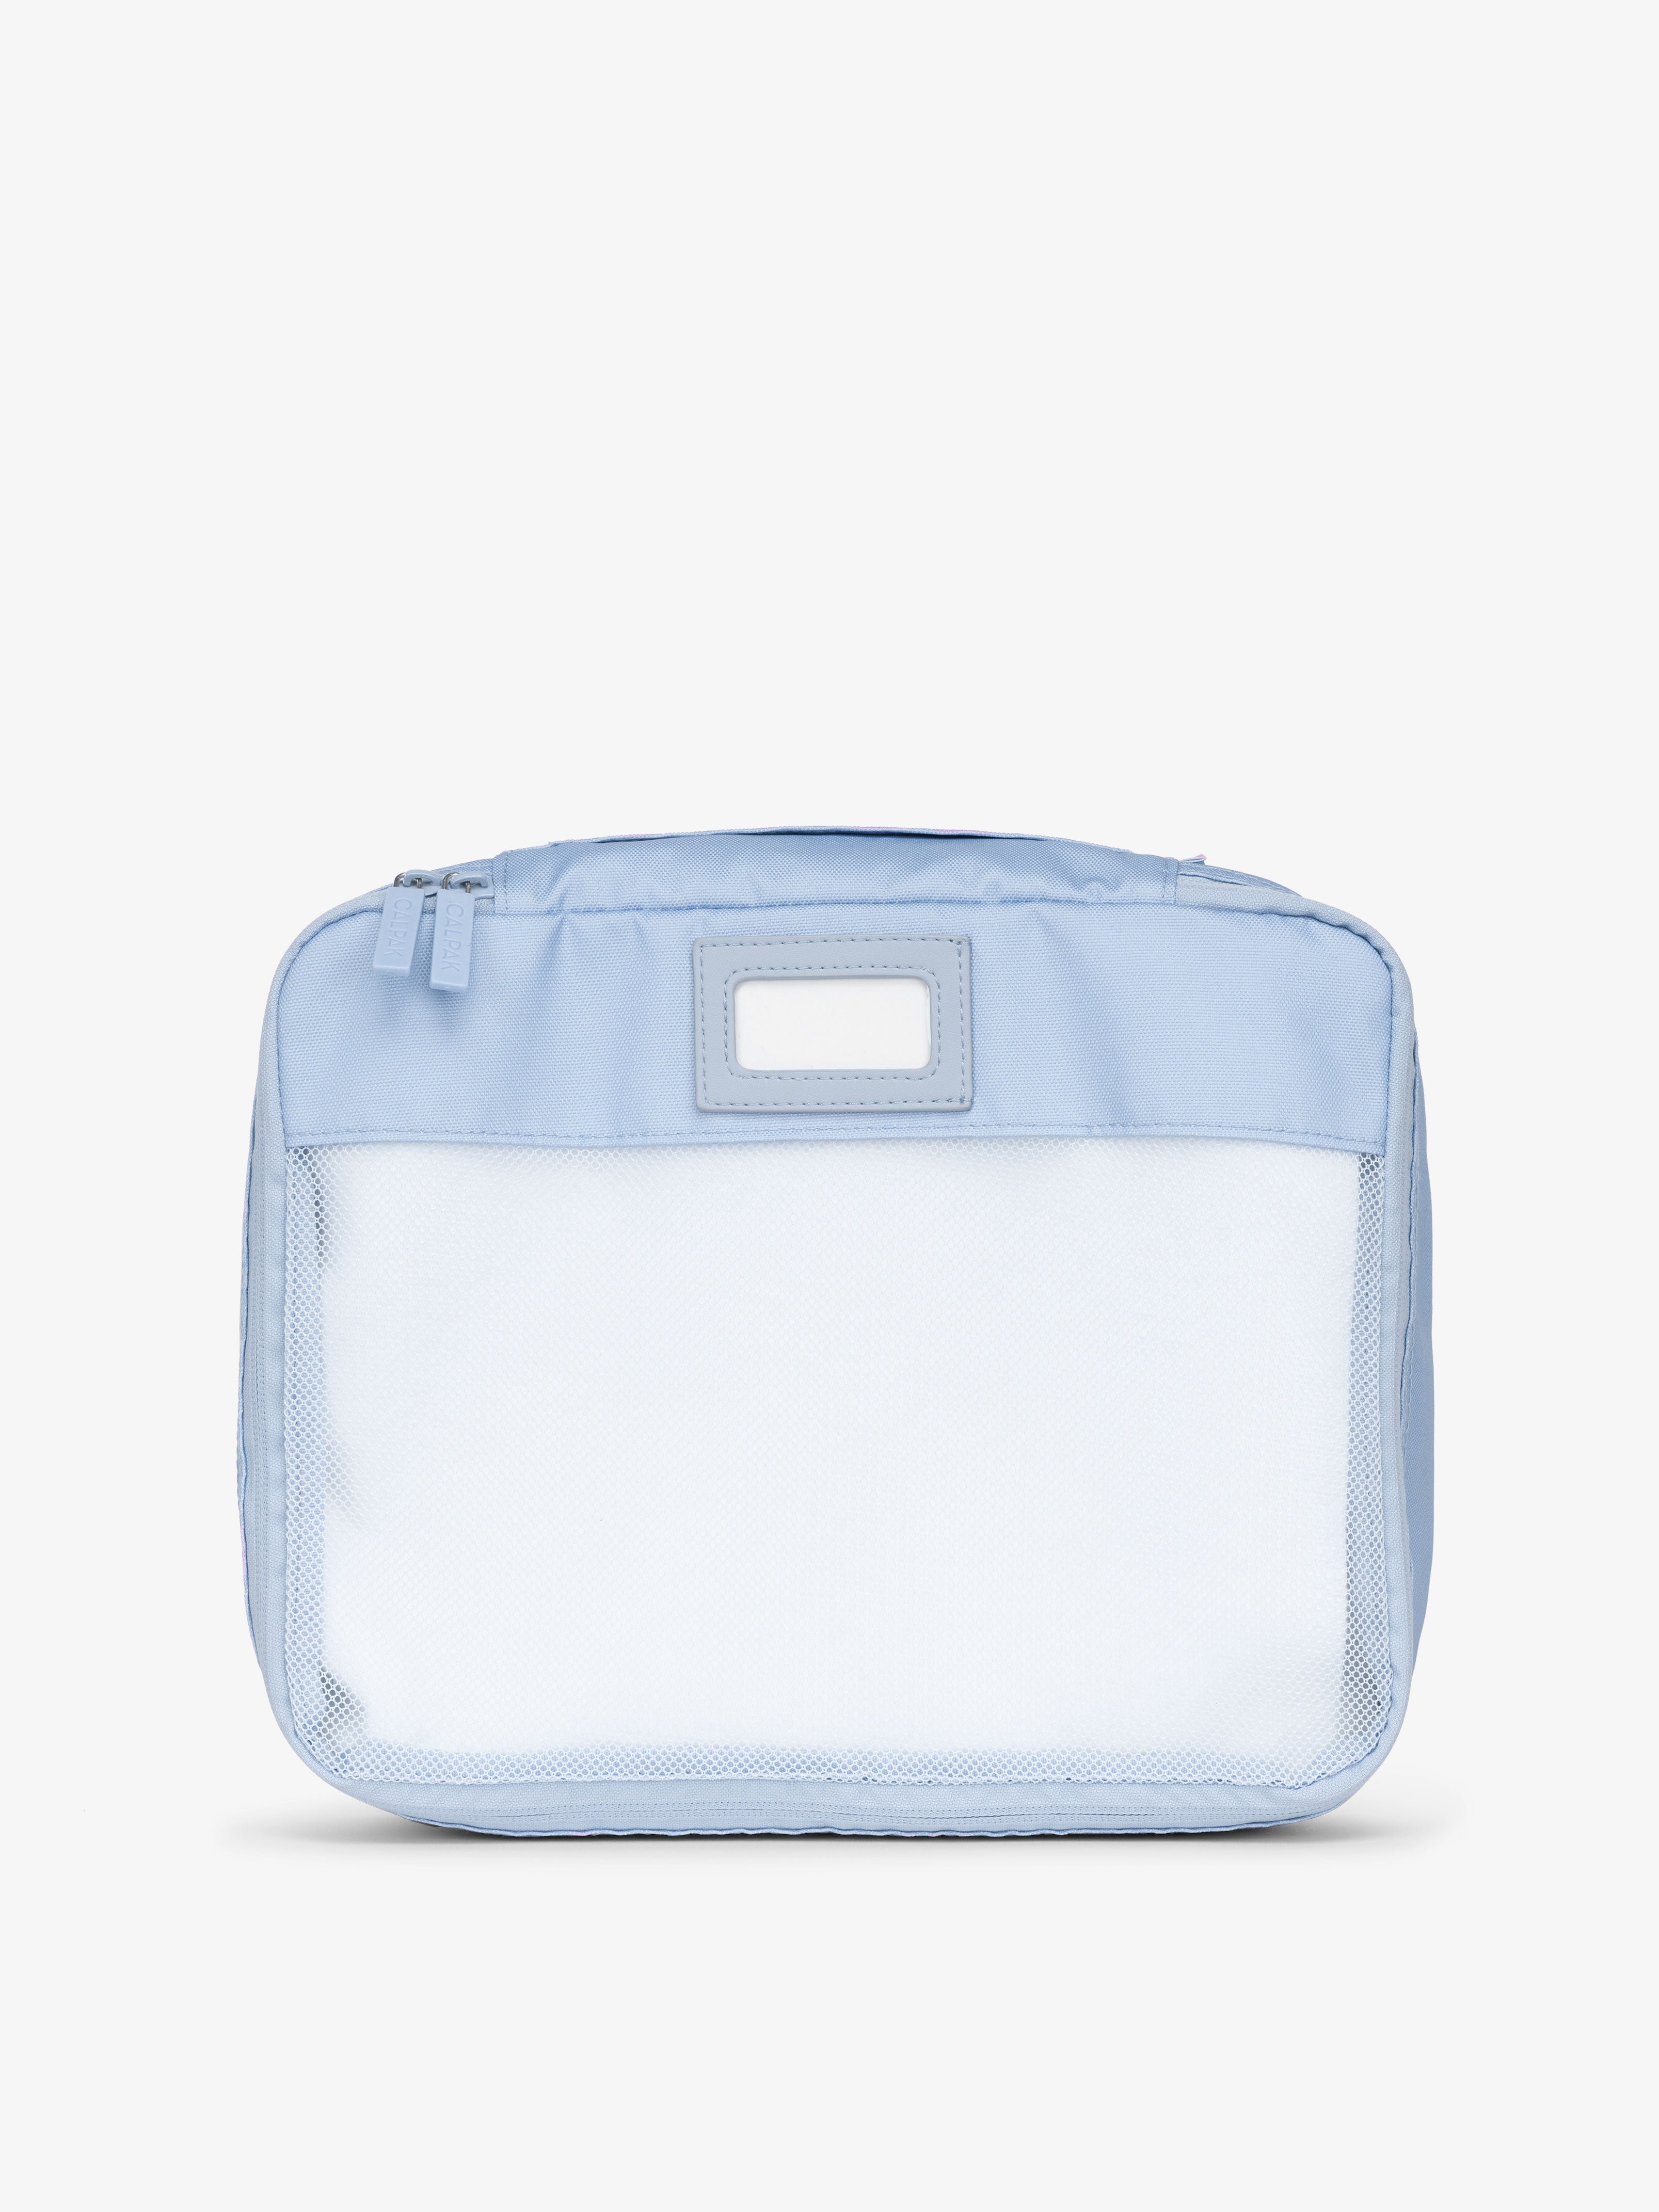 CALPAK luggage packing cubes for clothes with mesh front and label in light blue